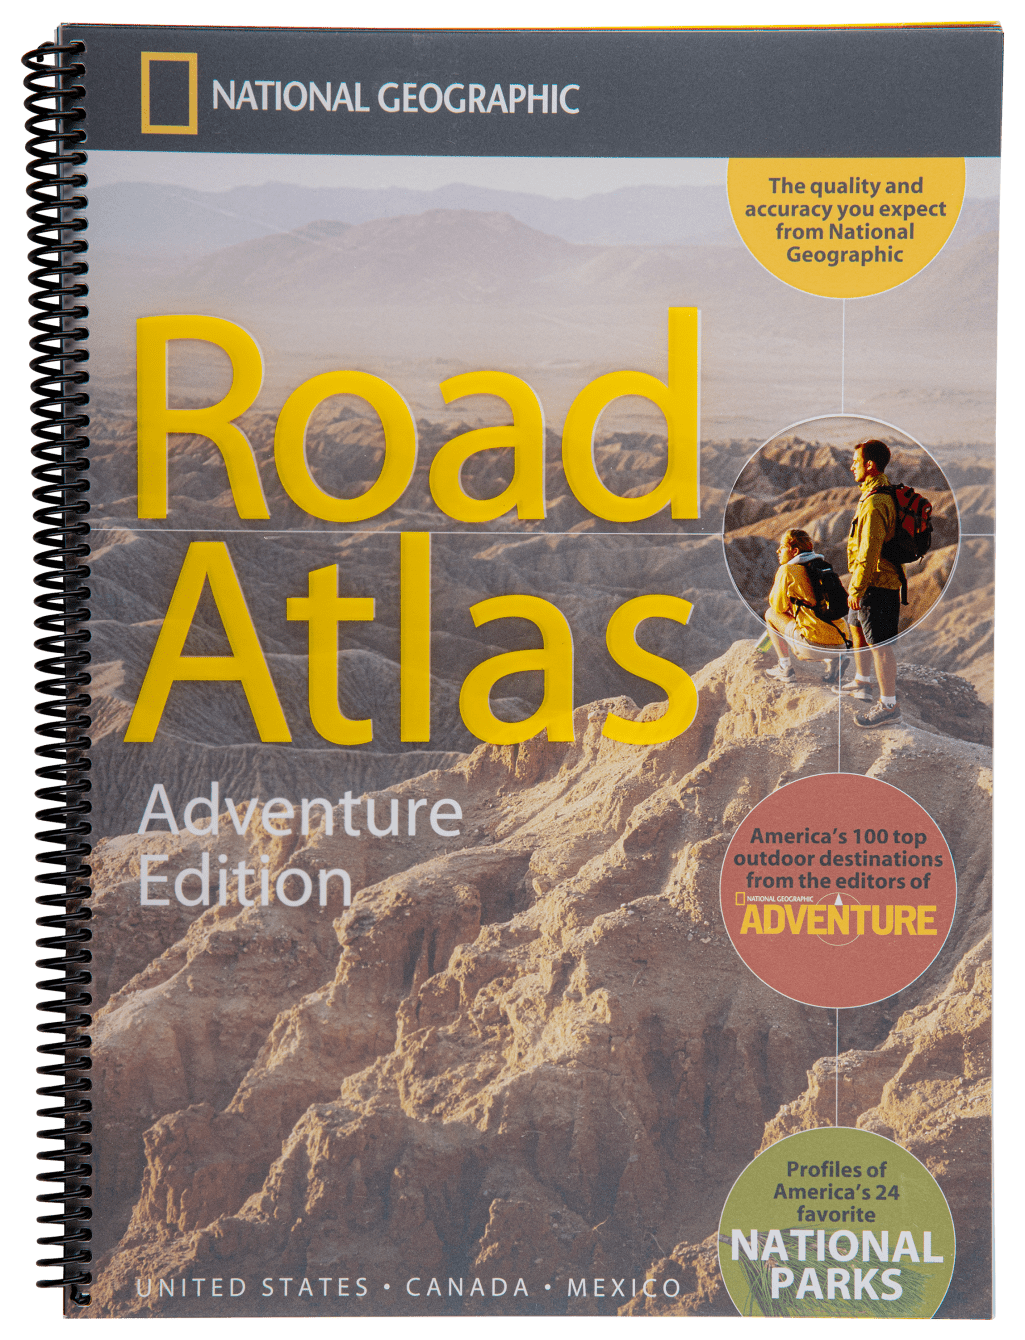 National Geographic Road Atlas: Adventure Edition - gifts for outdoorsy dads